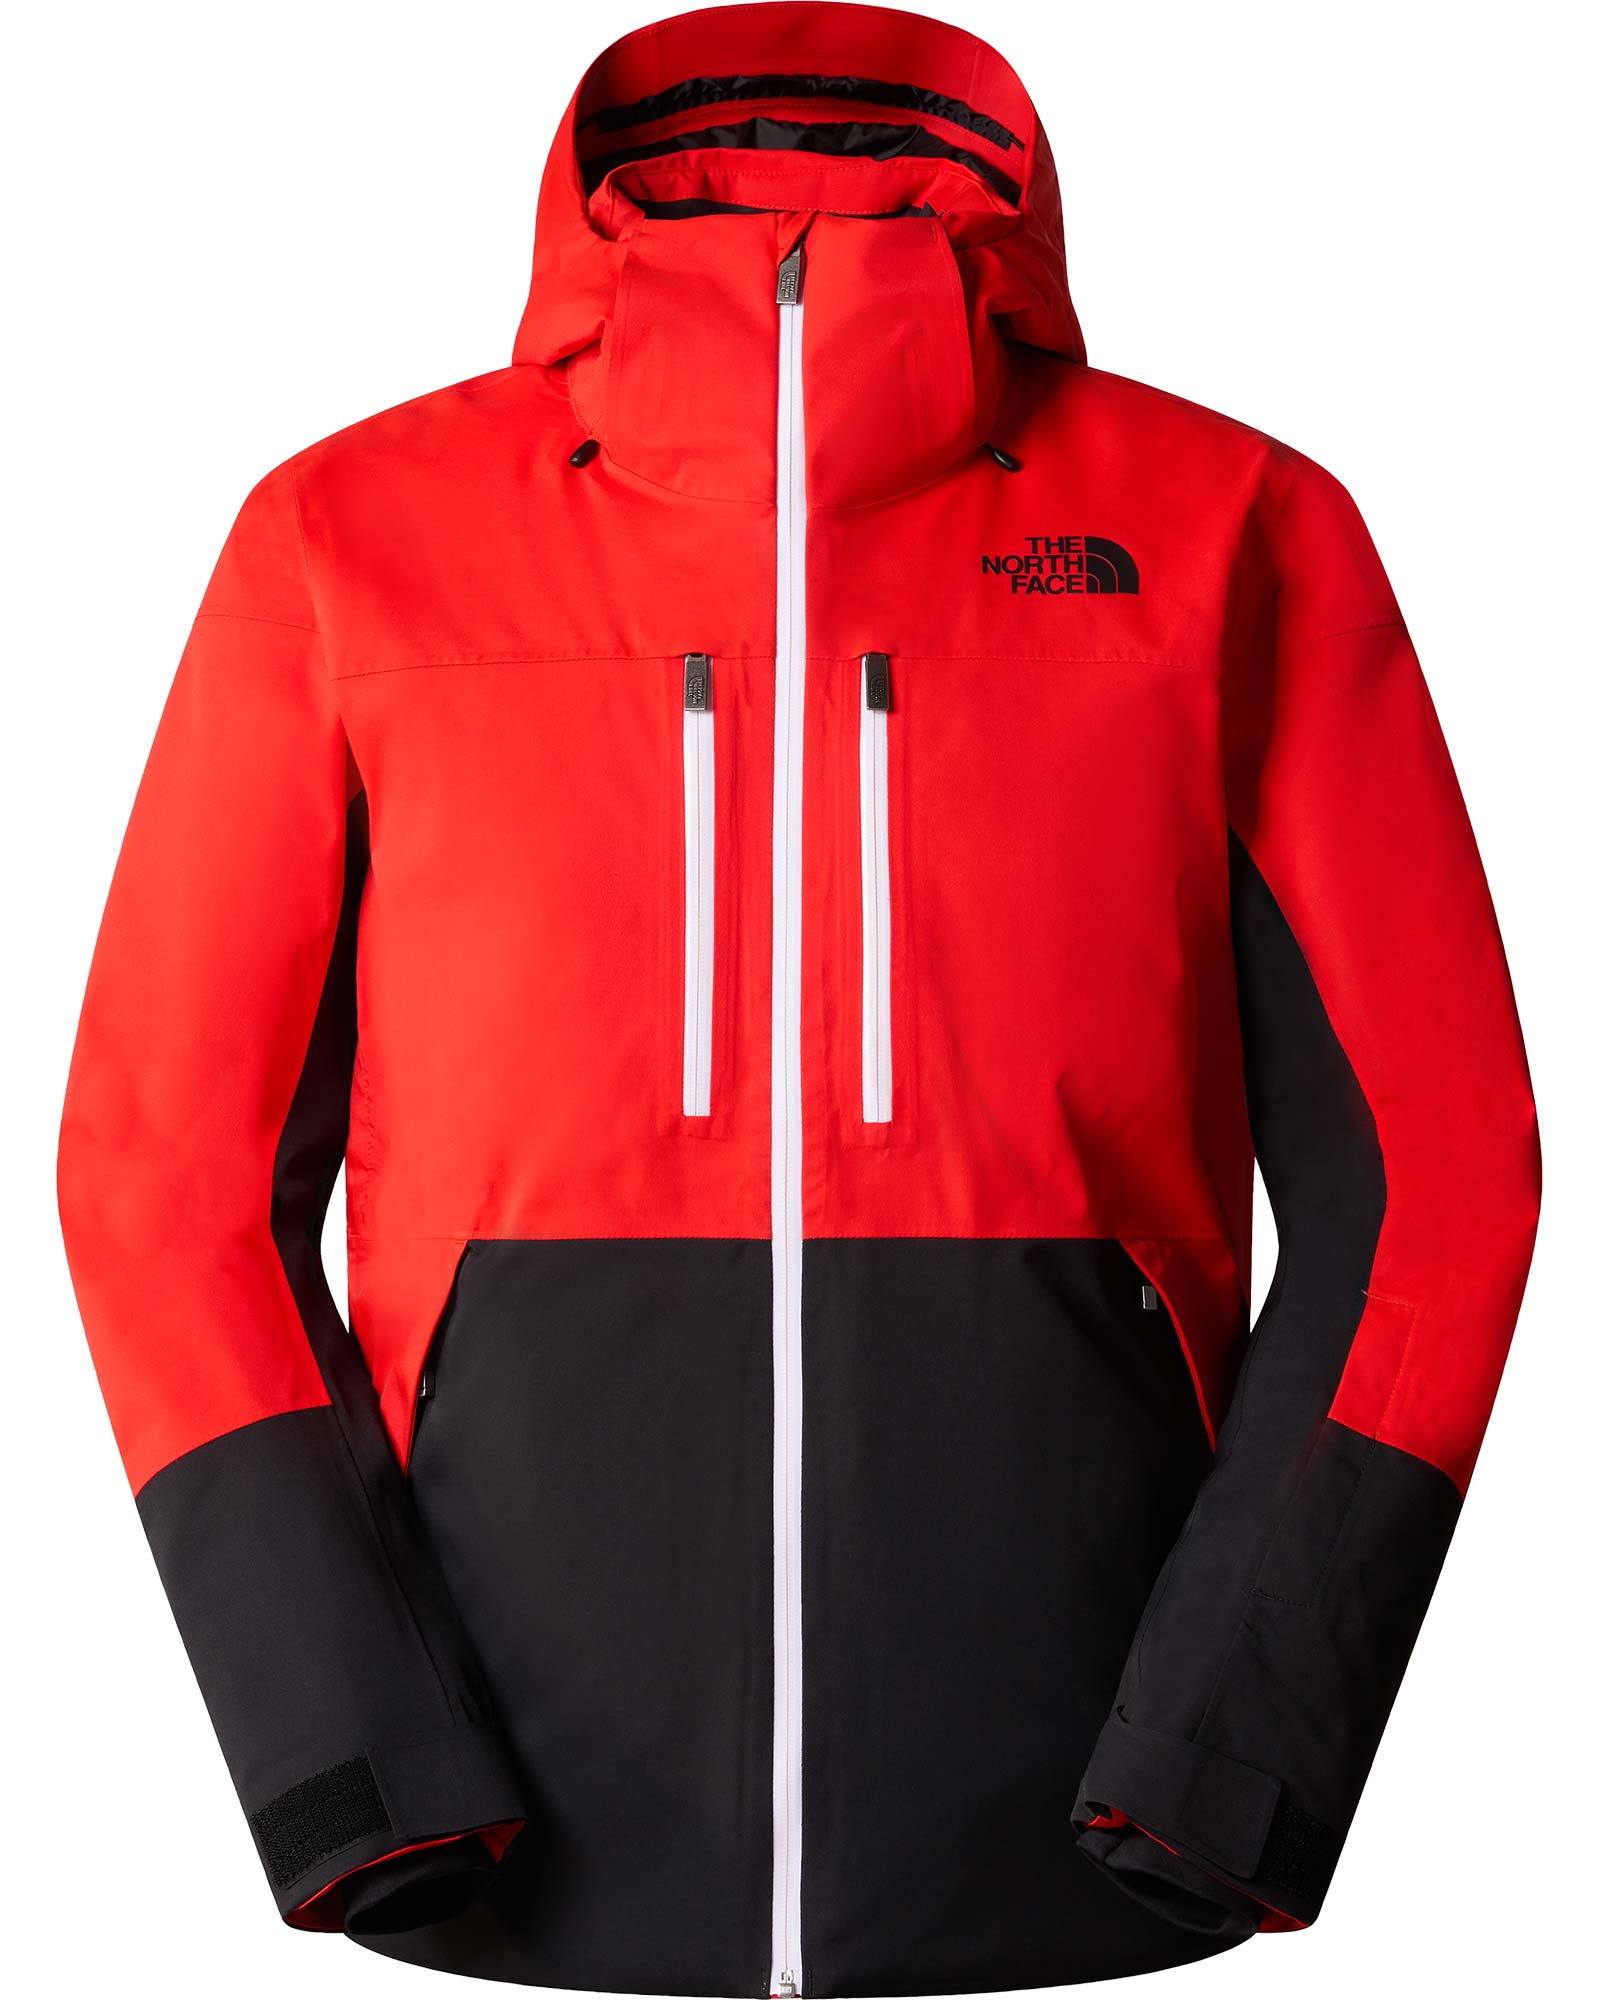 The North Face Chakal Men’s Jacket - Fiery Red/TNF Black S